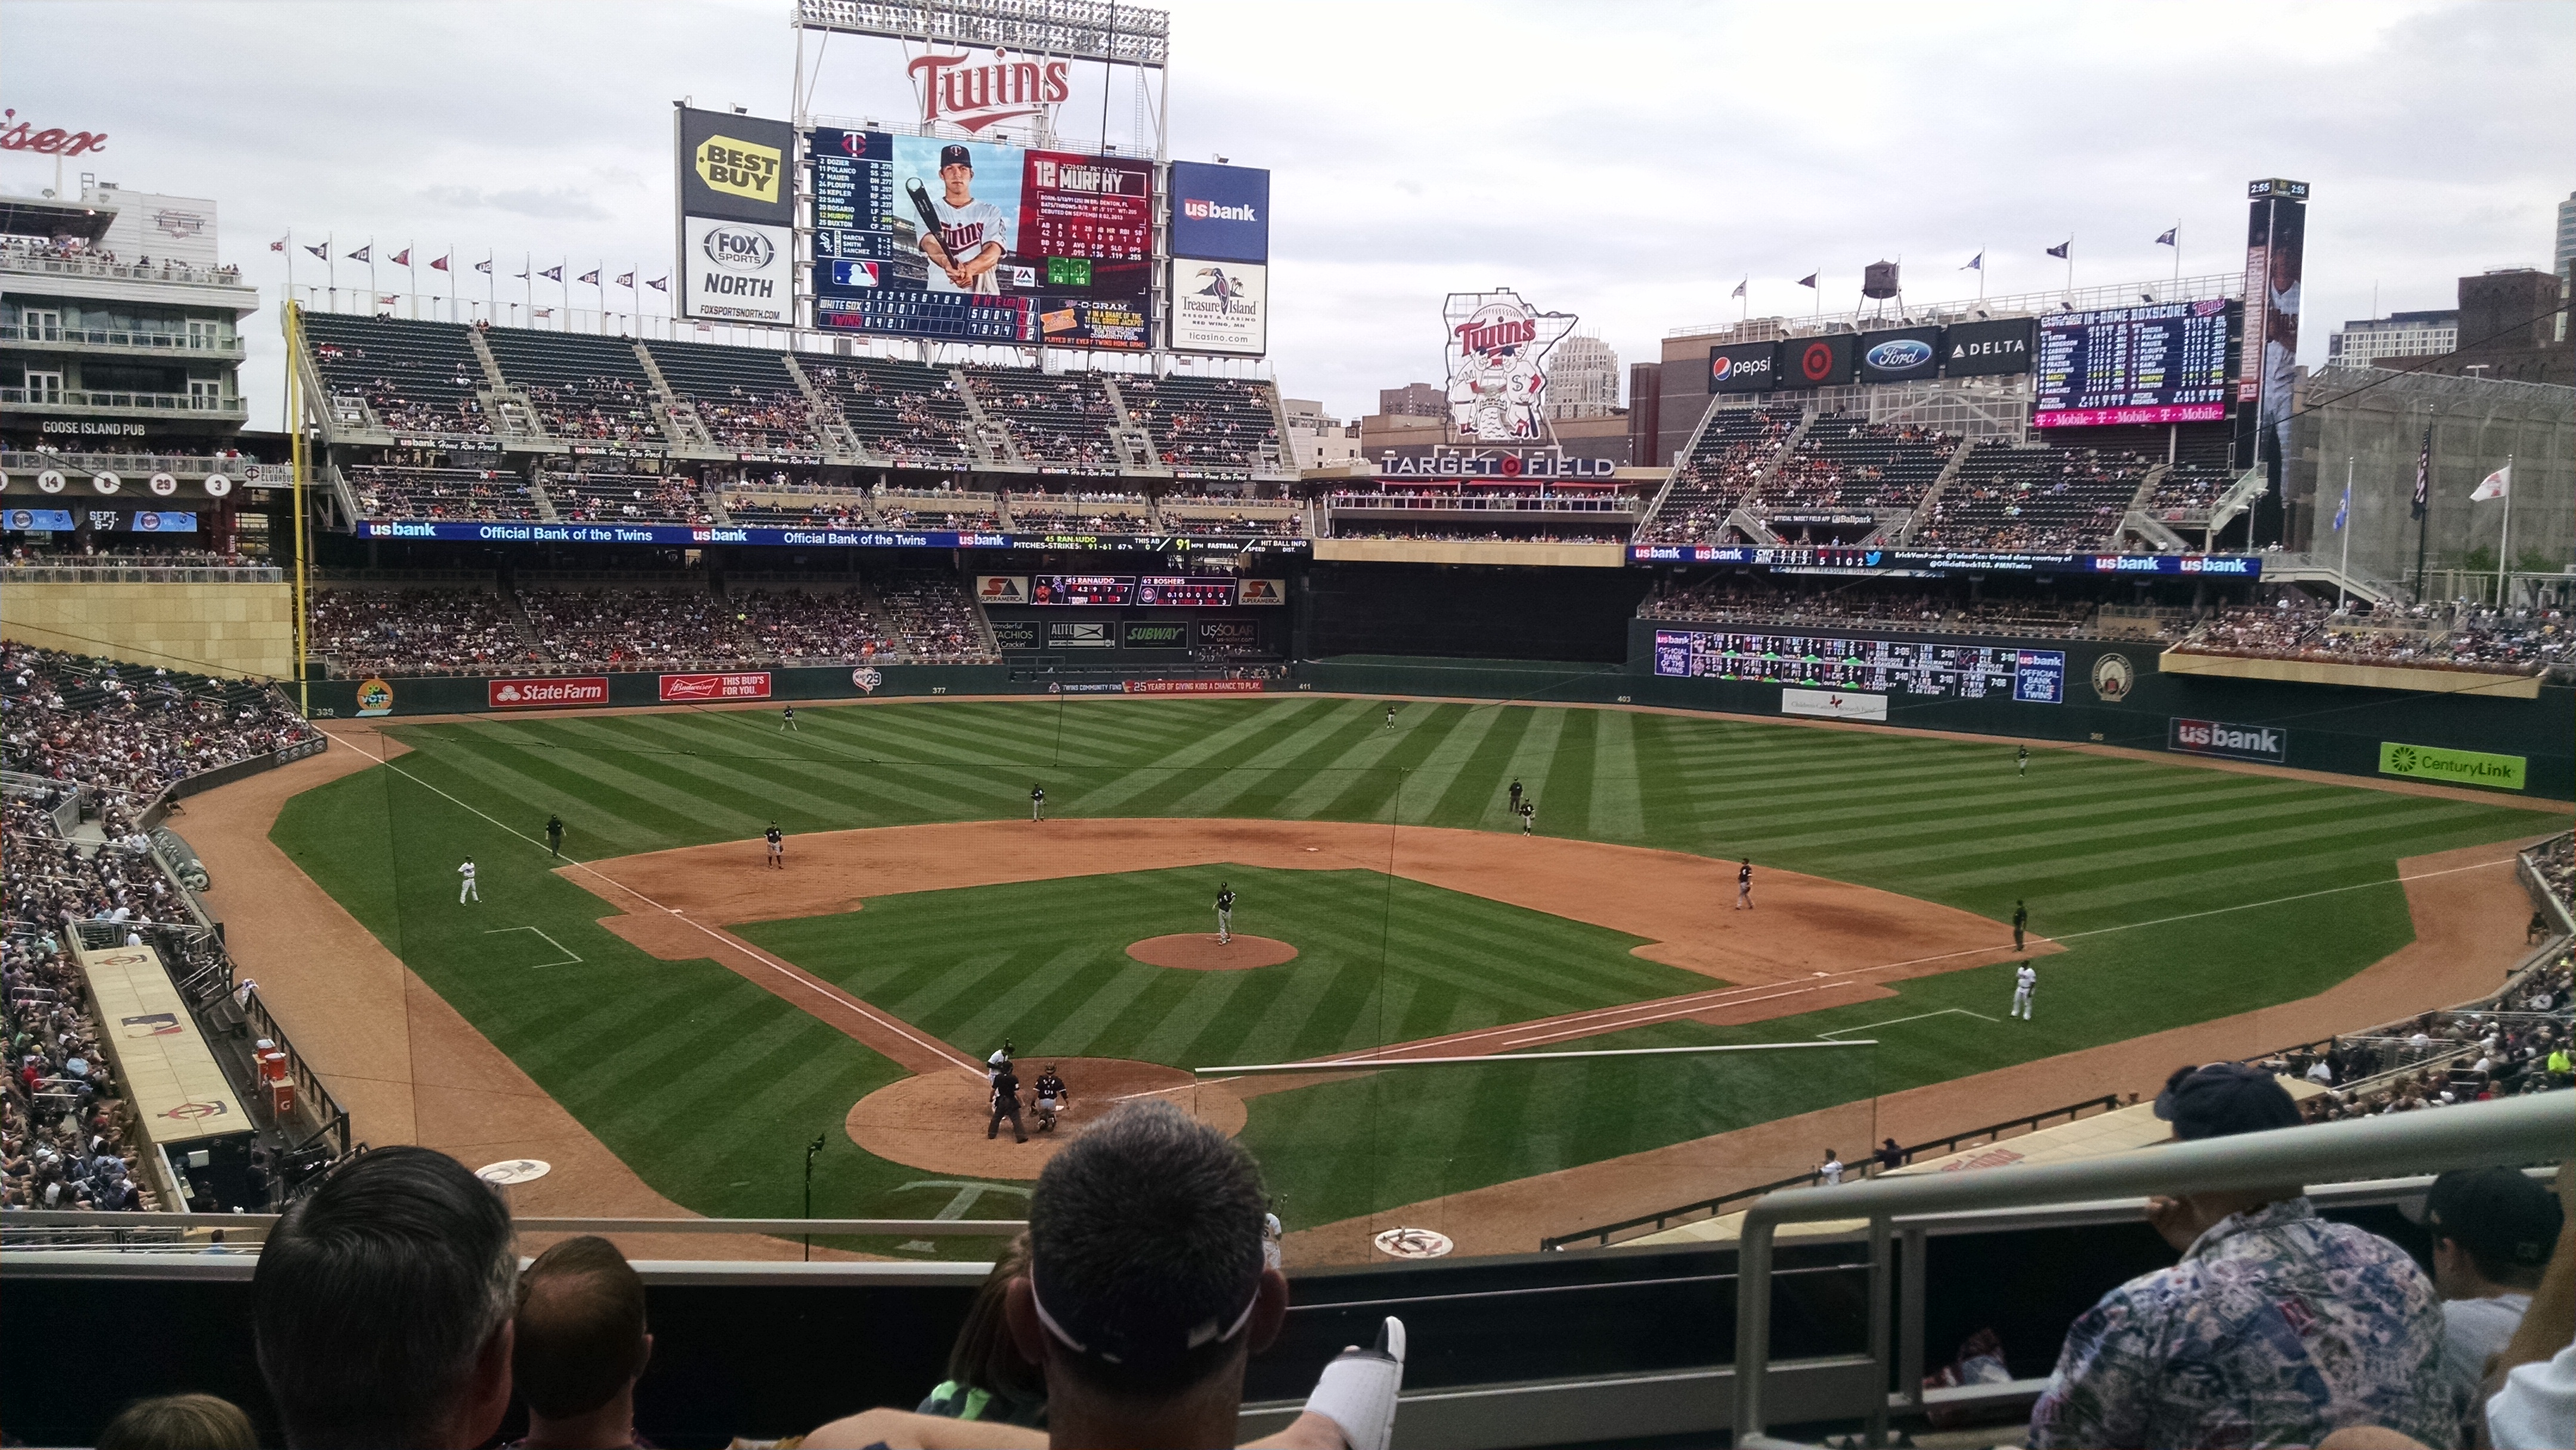 section g, row 4 seat view  - target field